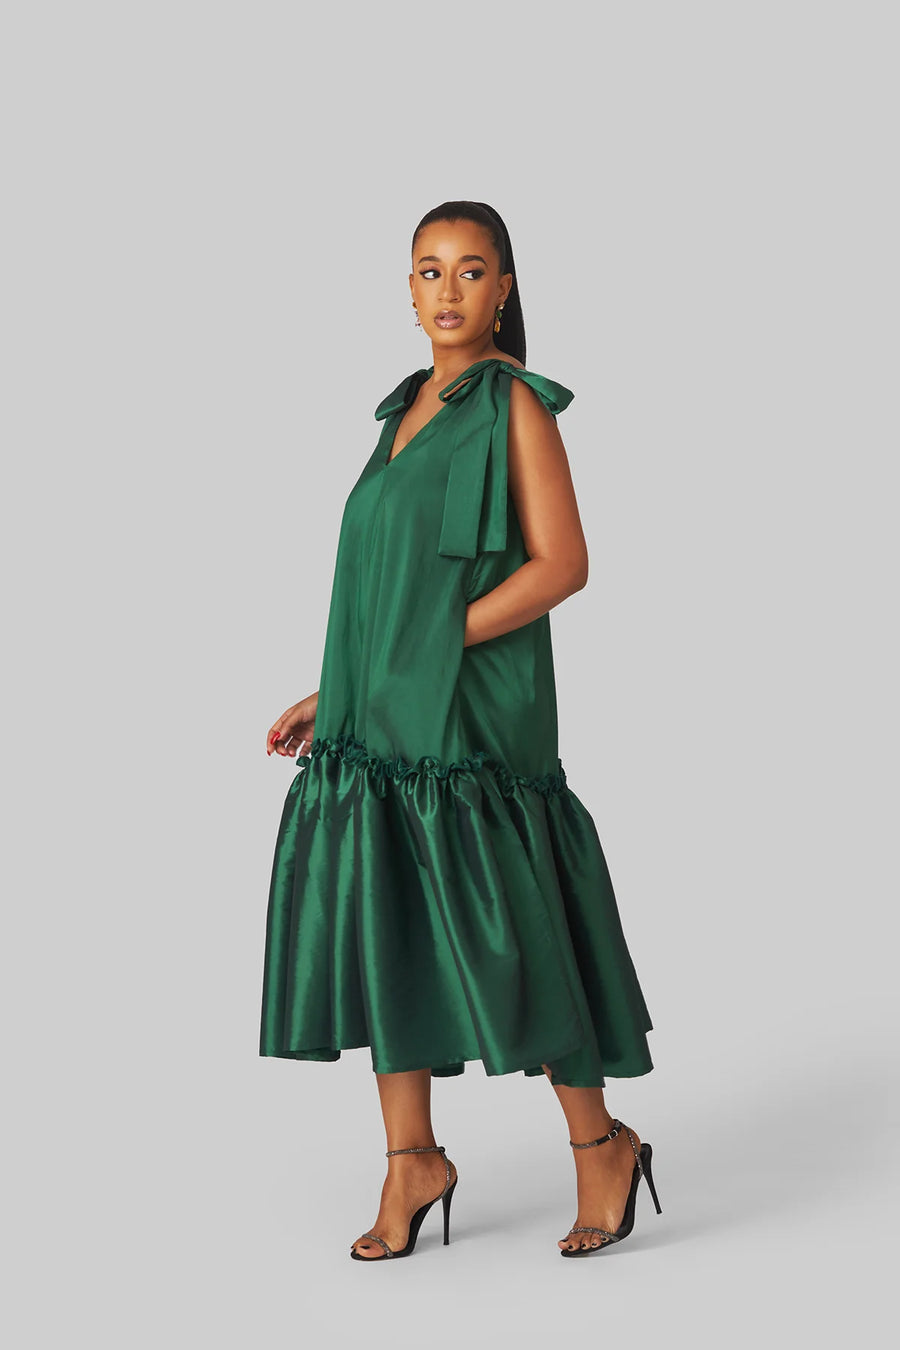 M.O.T Yinx dress, Loose midi dress with a deep V neckline and Tie details